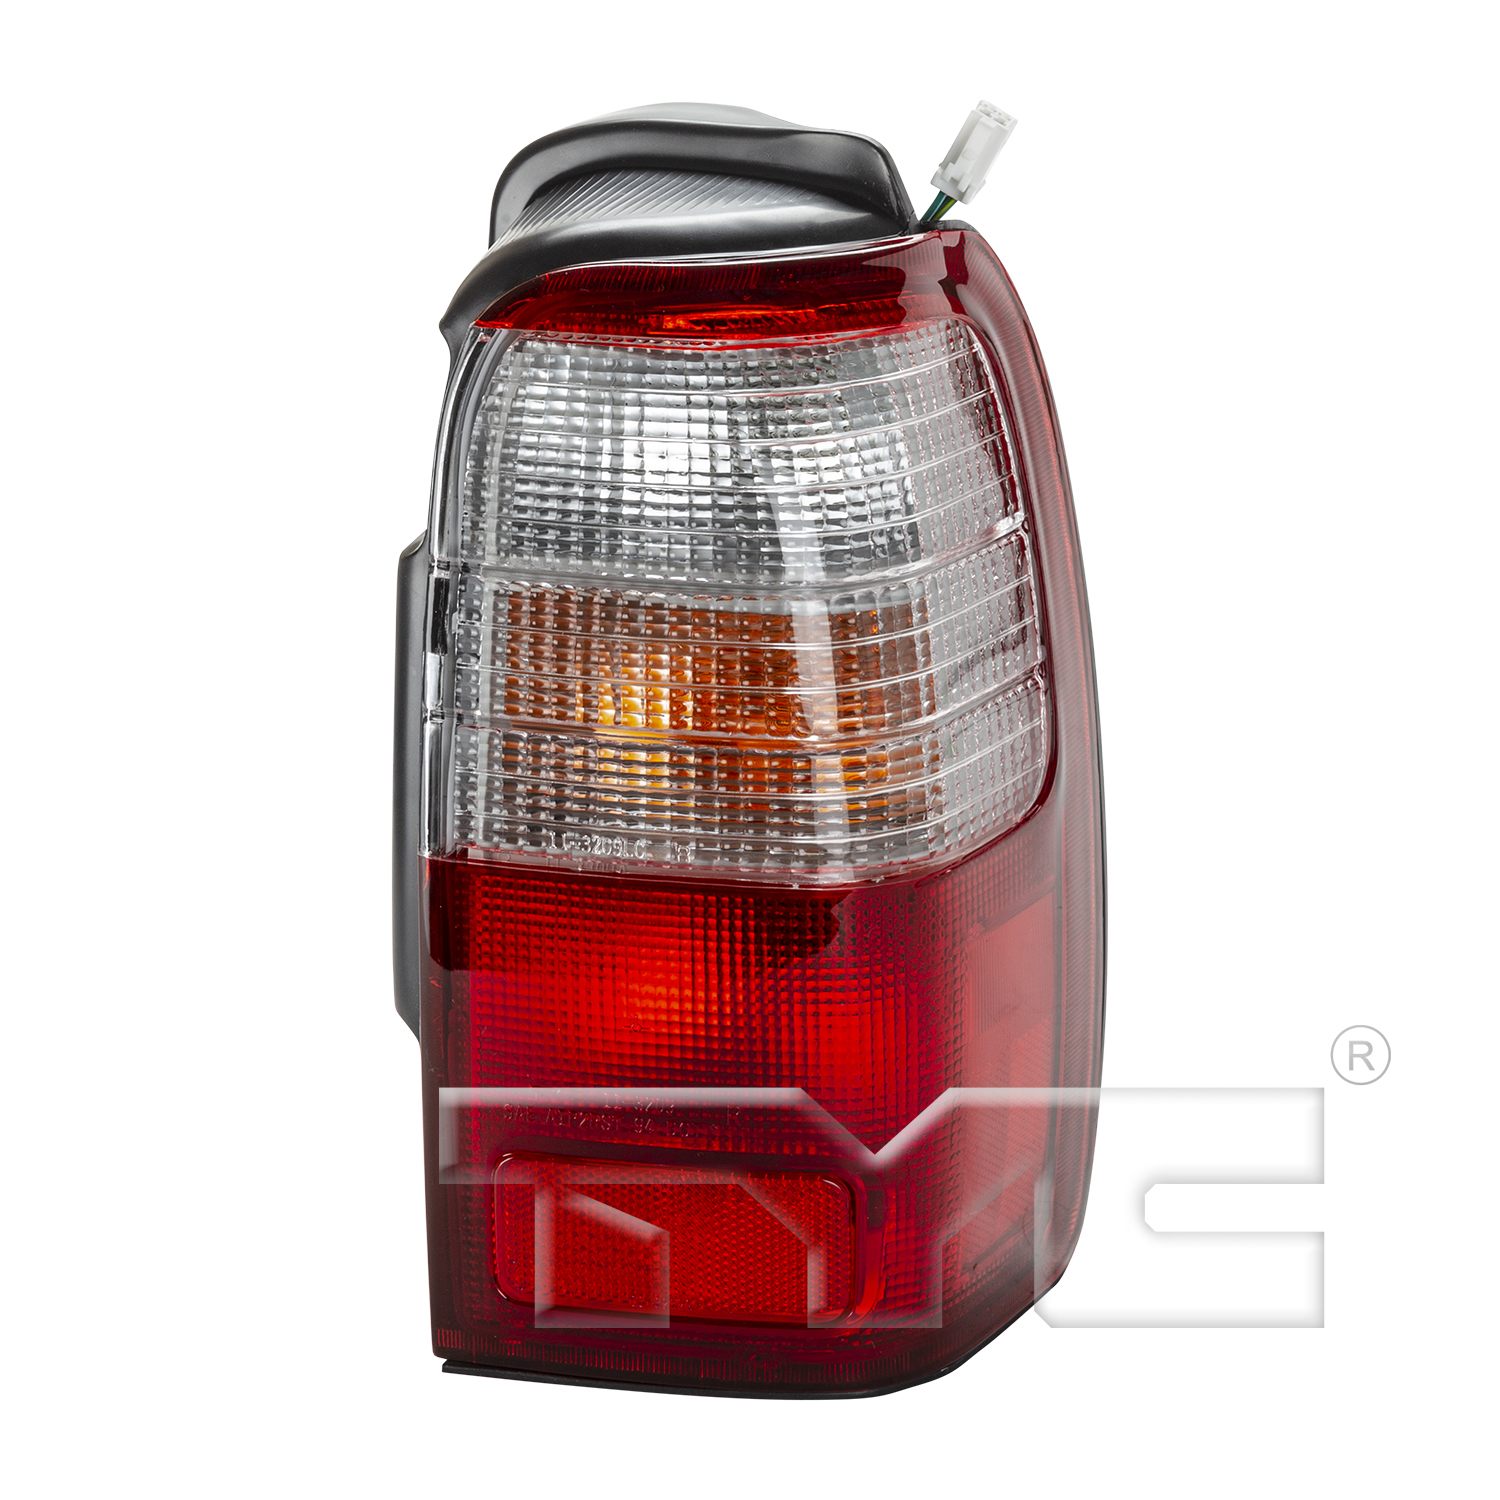 Aftermarket TAILLIGHTS for TOYOTA - 4RUNNER, 4RUNNER,96-97,RT Taillamp assy